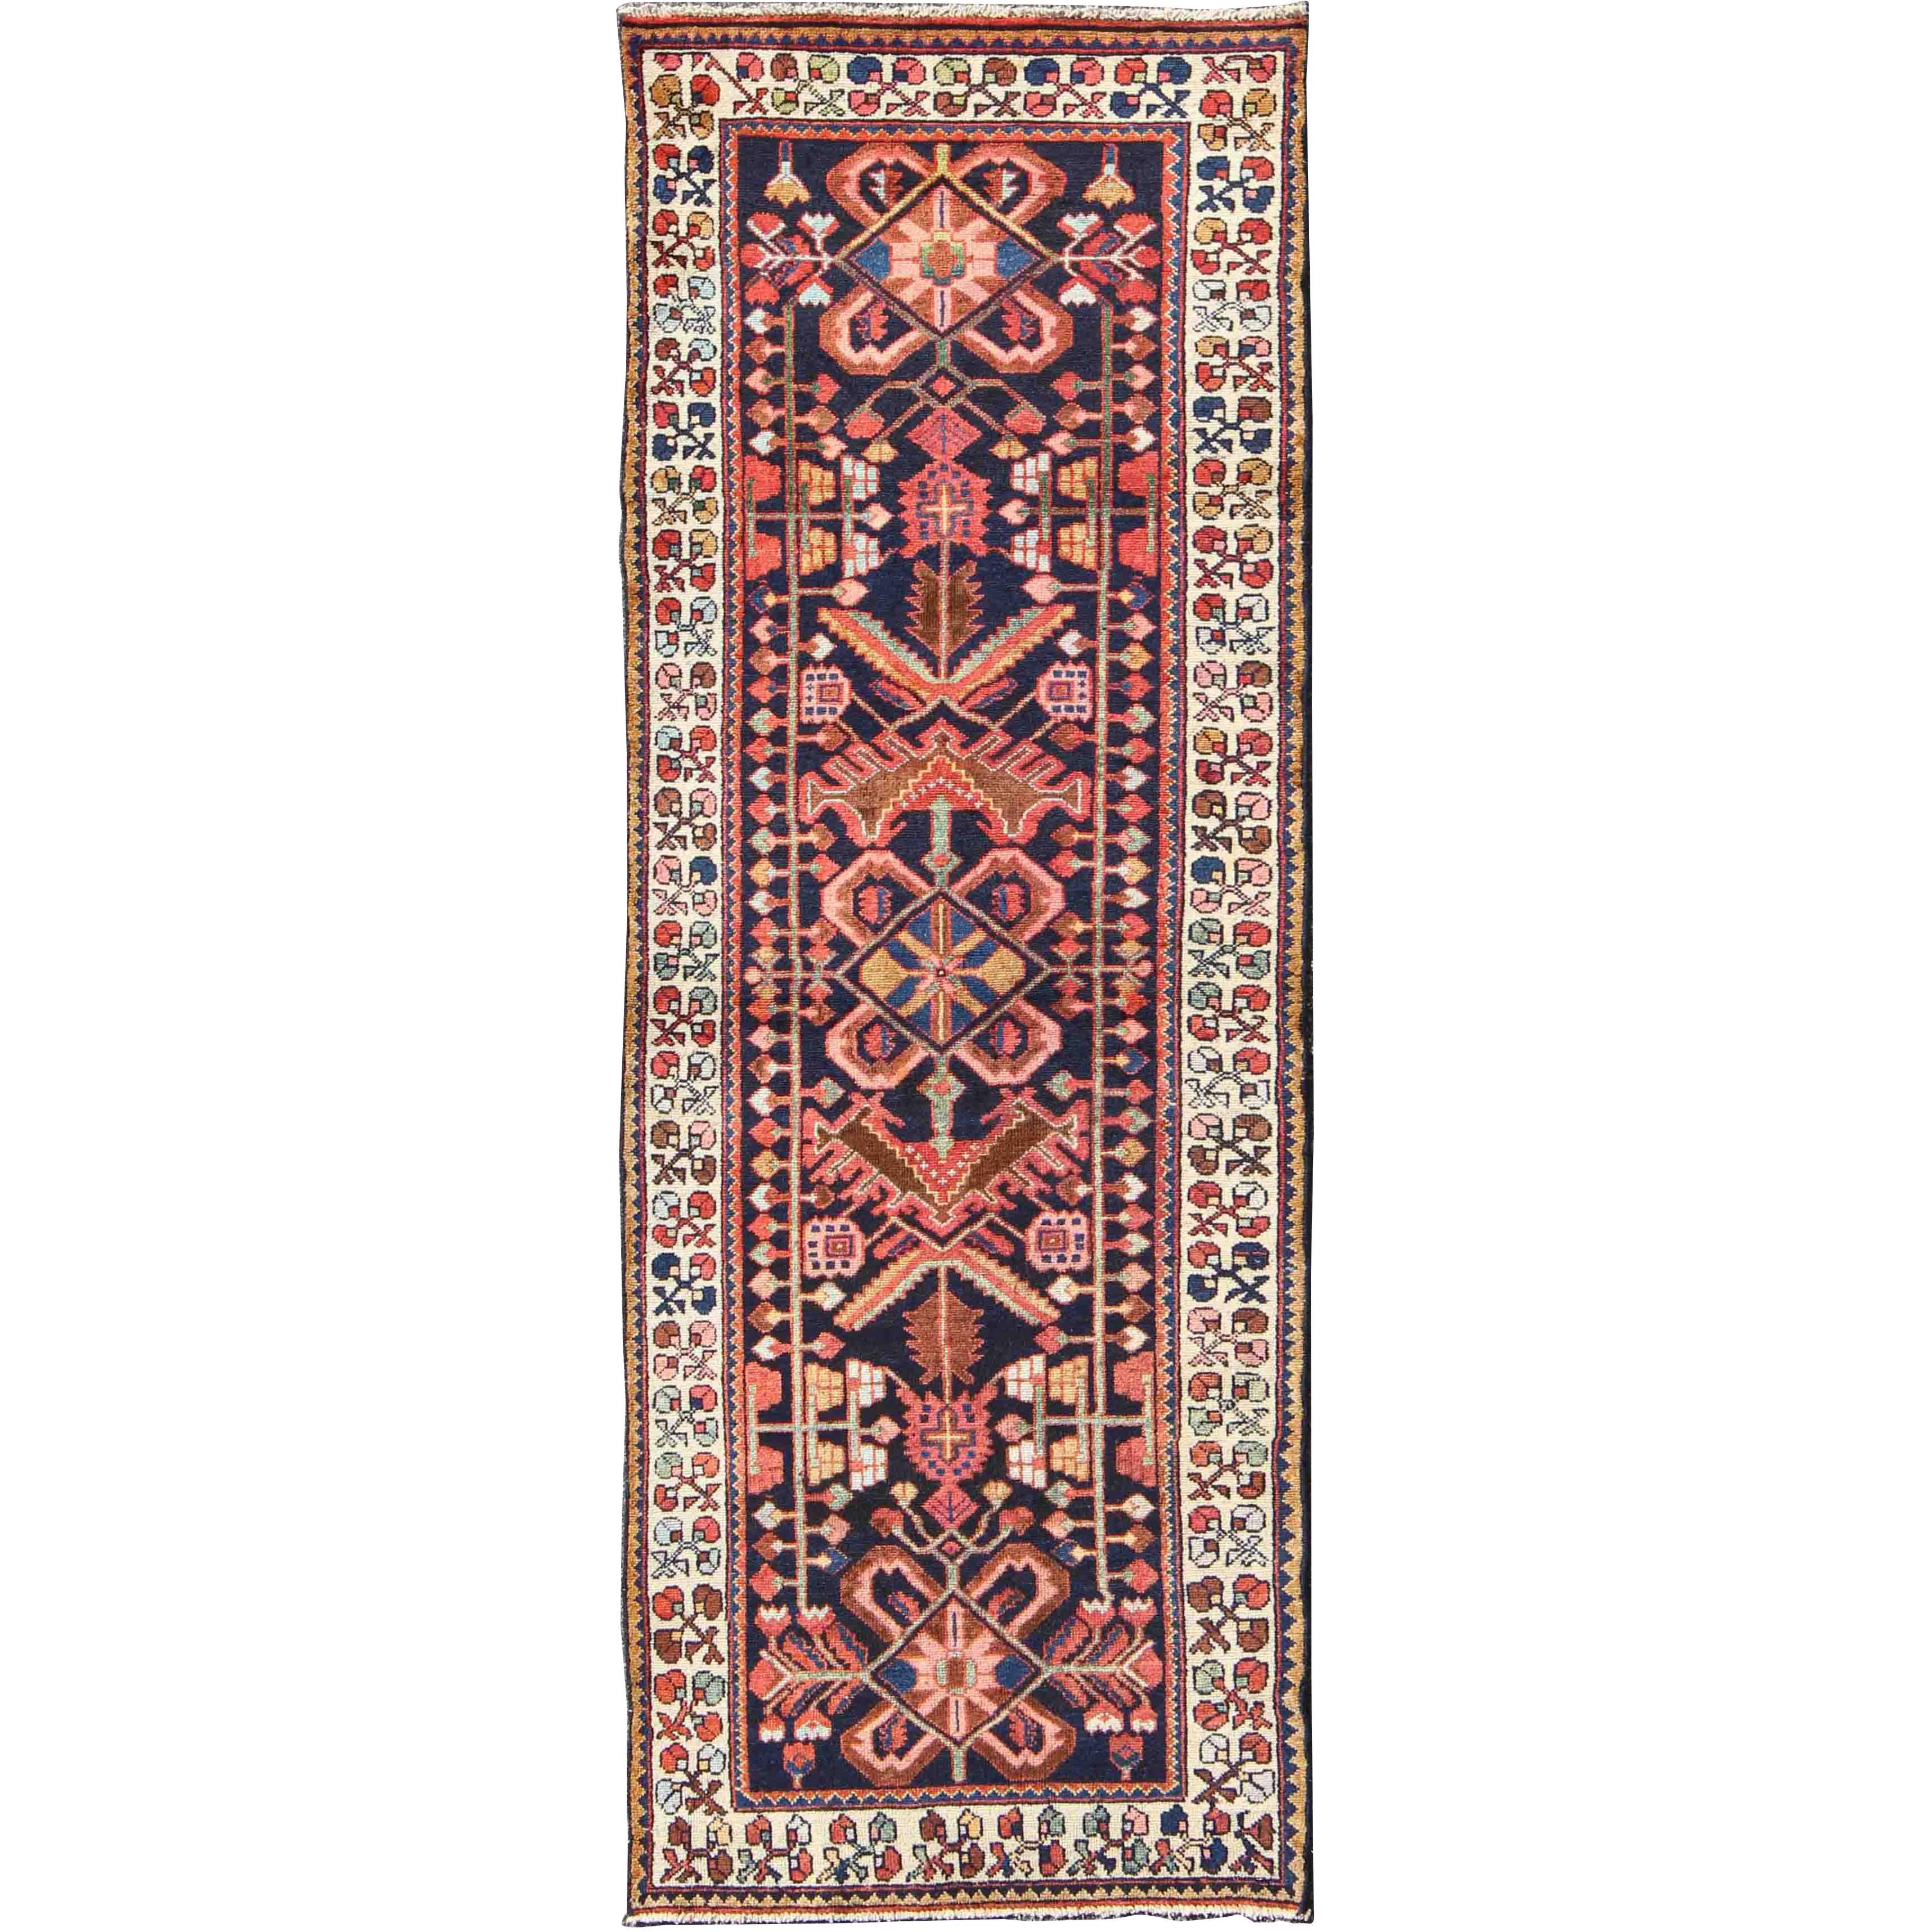 Tribal Midcentury Persian Hamedan Rug in Midnight Blue, Red, Green and Brown For Sale